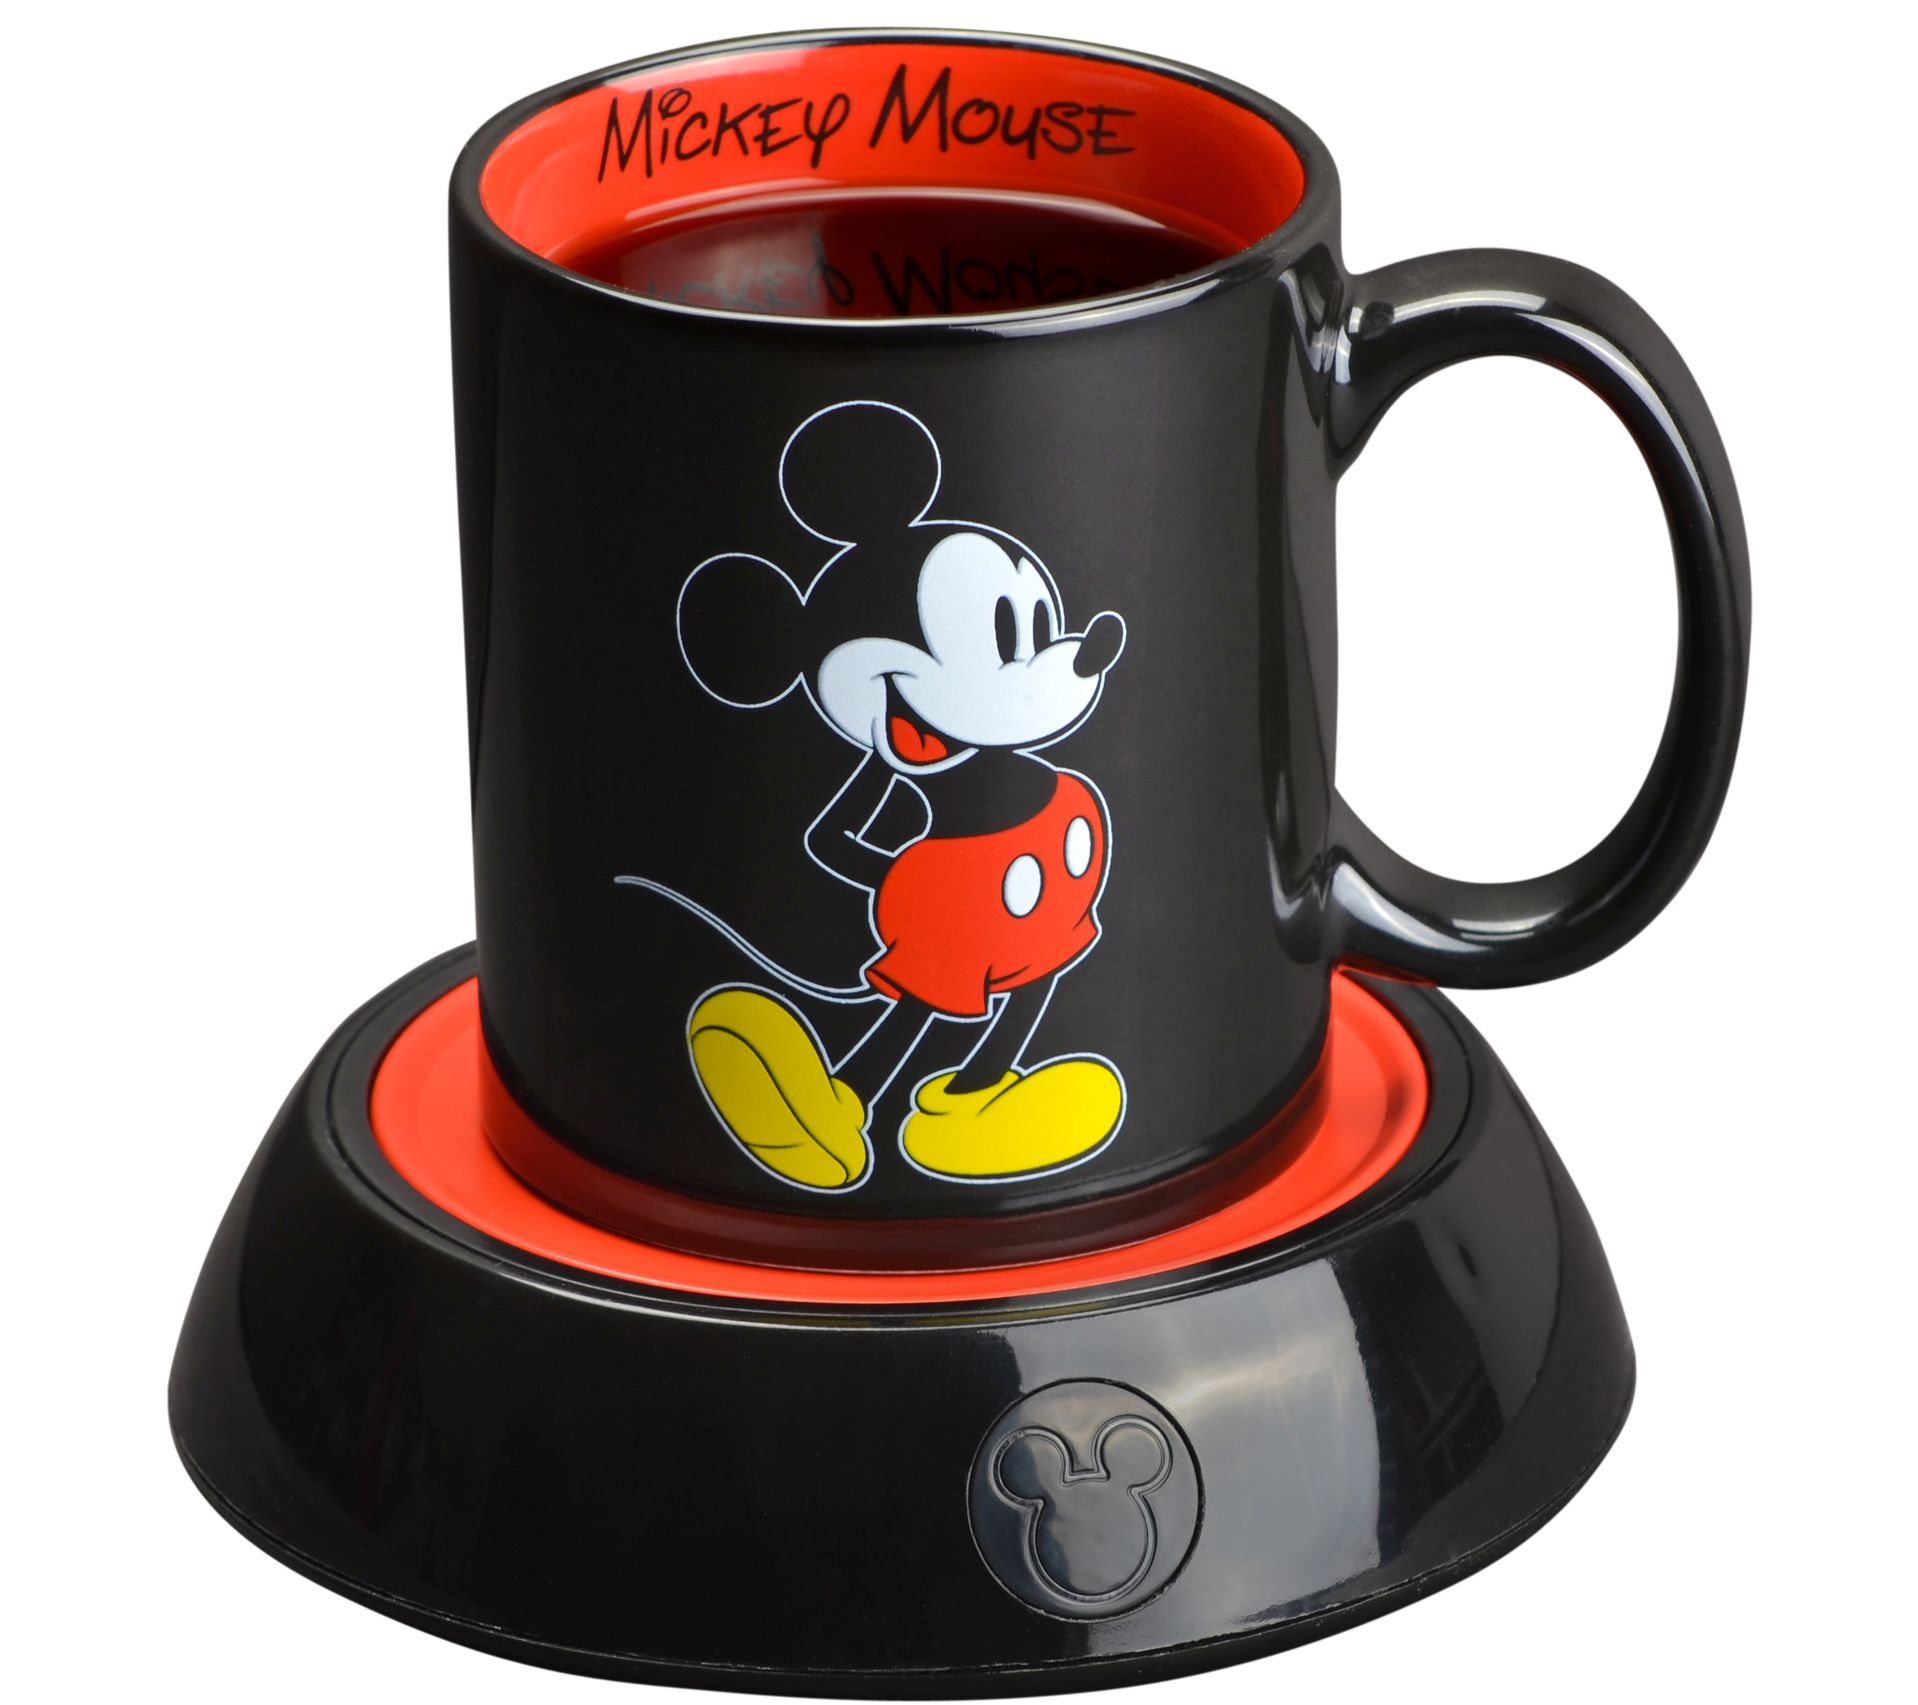 JCPenney Disney Mickey Mouse 90 Years Mug Warmer 20.00